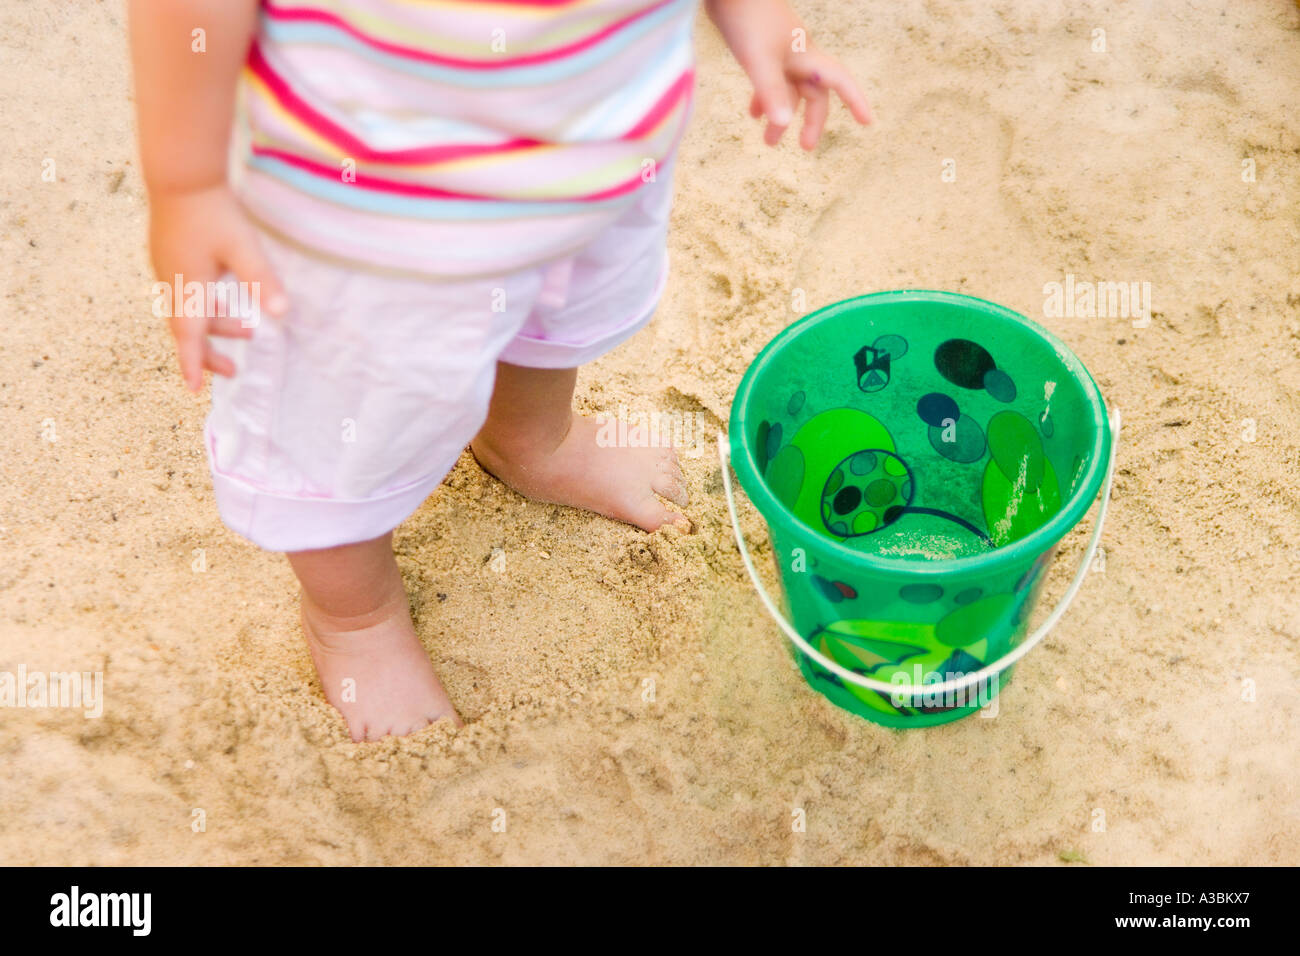 Toddler (18-24 months) standing on beach with toy bucket, low section Stock Photo